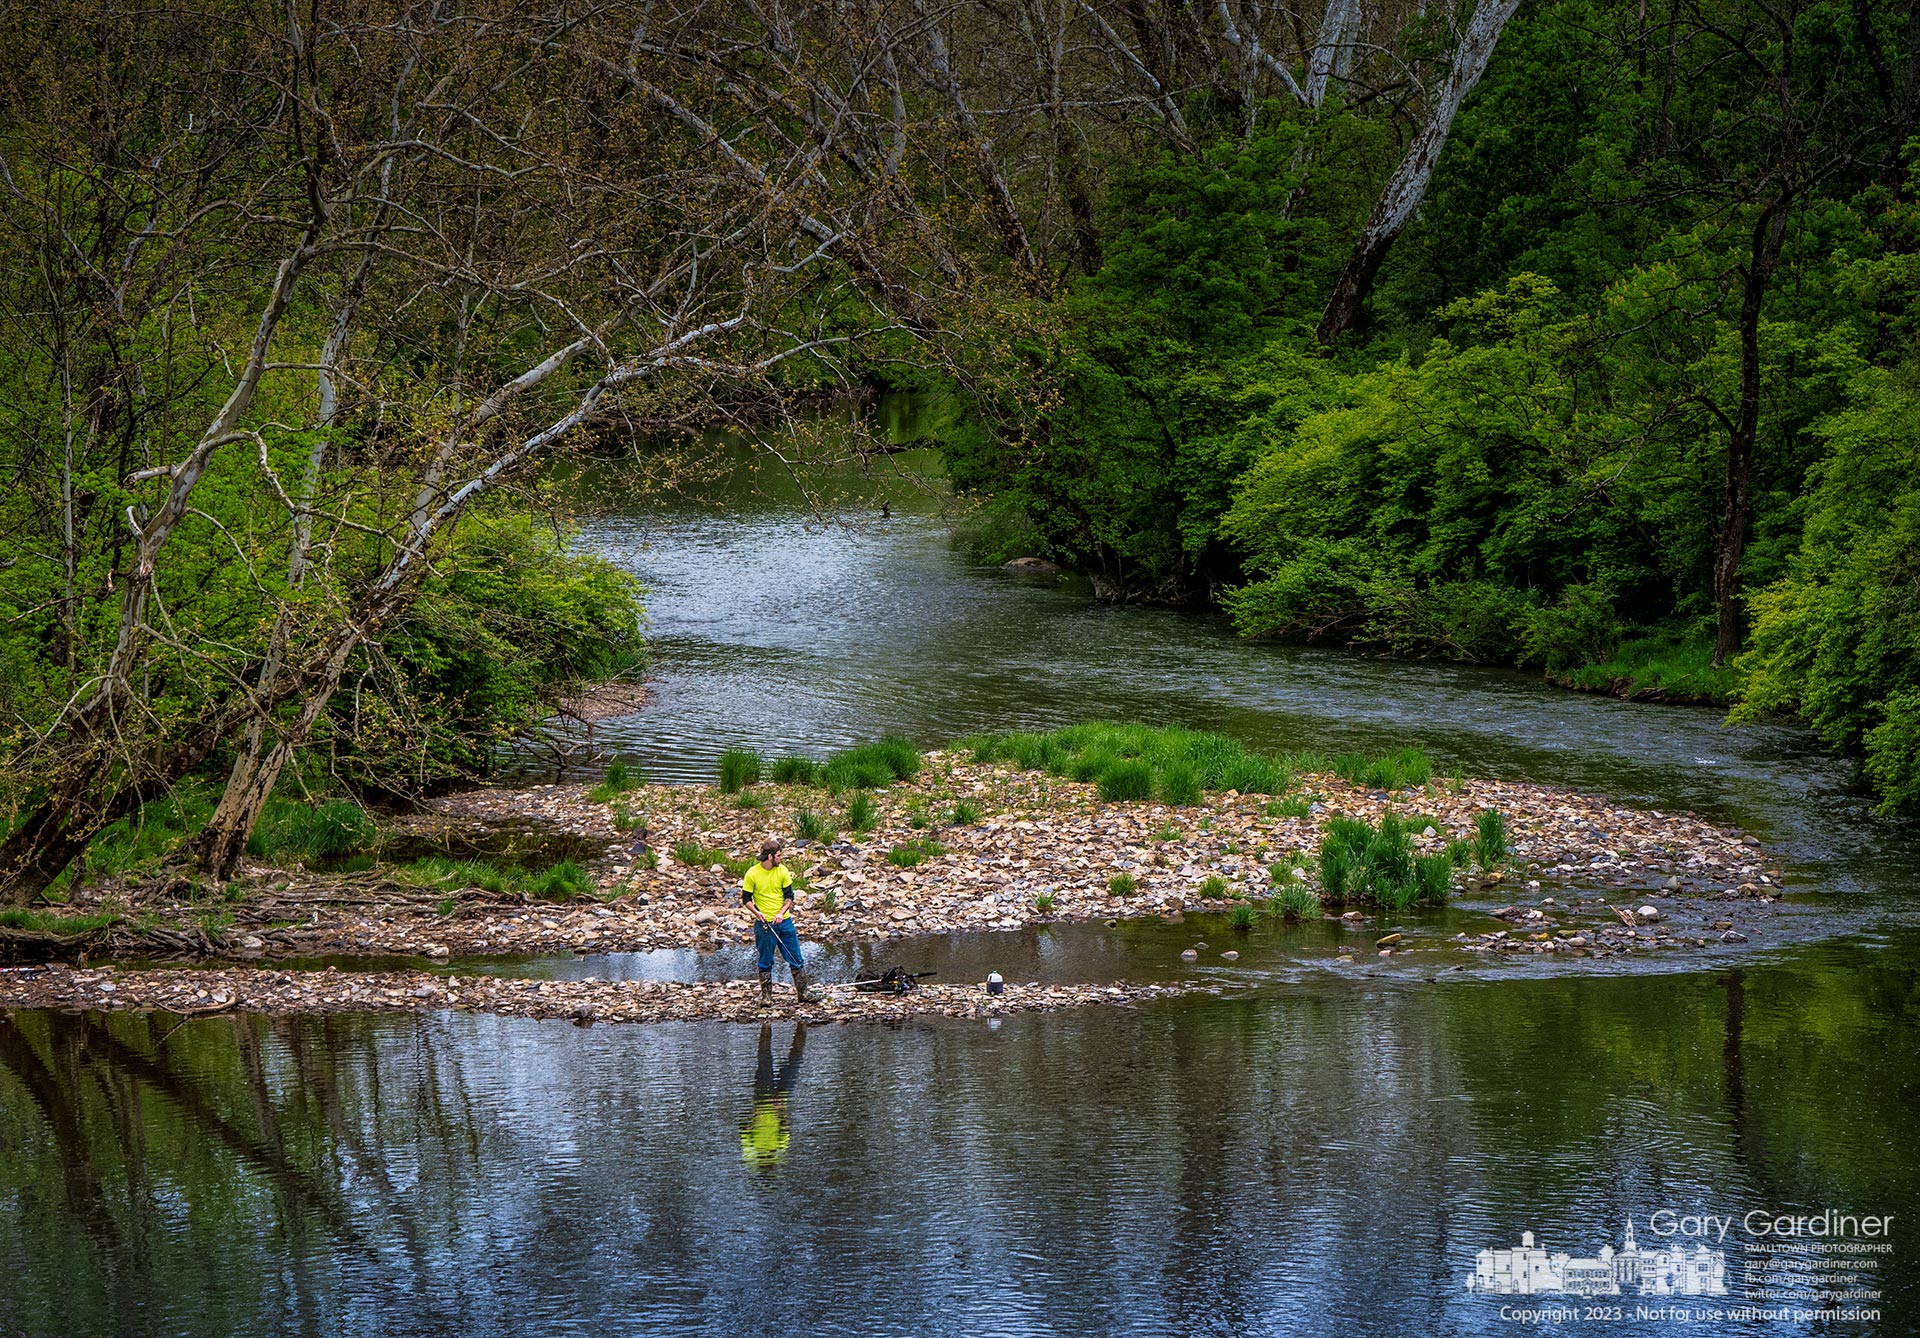 A fisherman tosses his lure into the waters of Big Walnut Creek as it moves past a pile of exposed till about a half mile below Hoover Dam. My Final Photo for May 7, 2023.